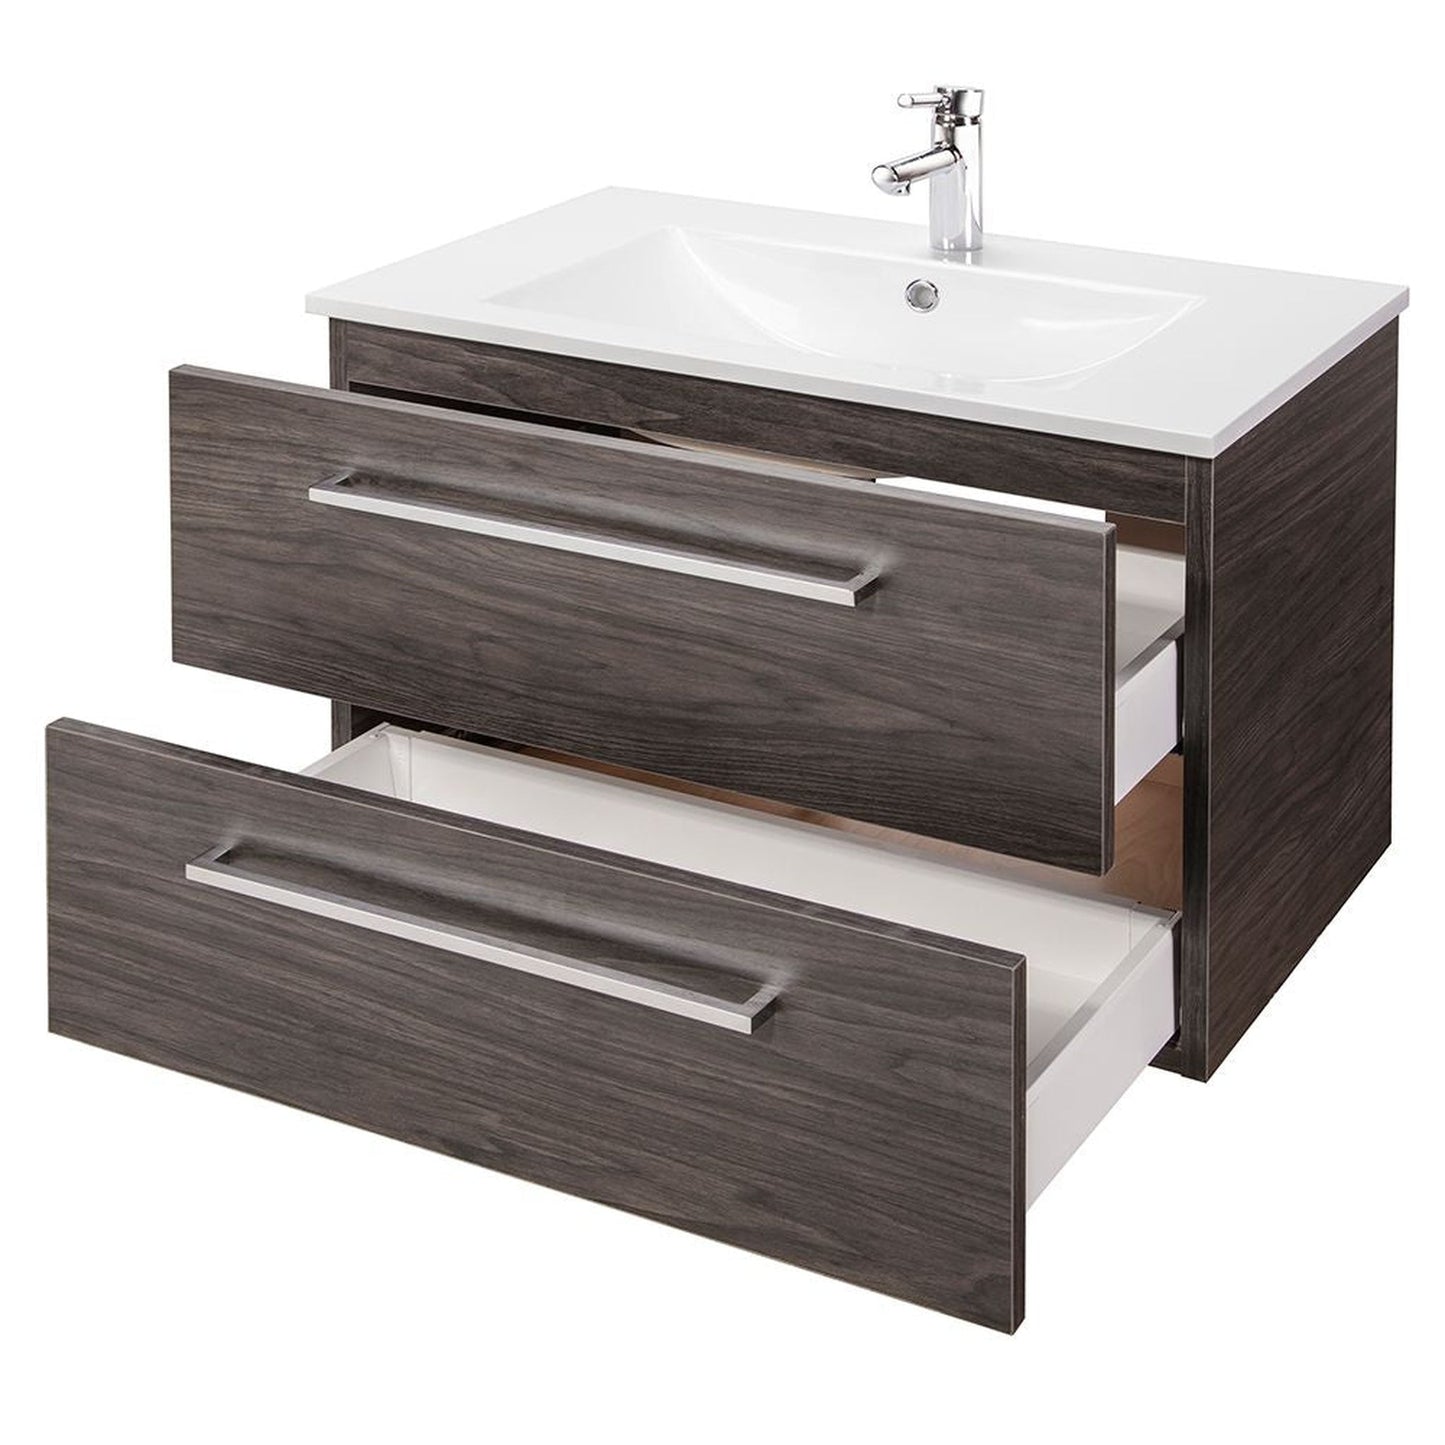 Abby Bath Aiden 30” x 20” Wall-Mounted Vanity in Noir Finish With Two Drawers and Chrome Handles